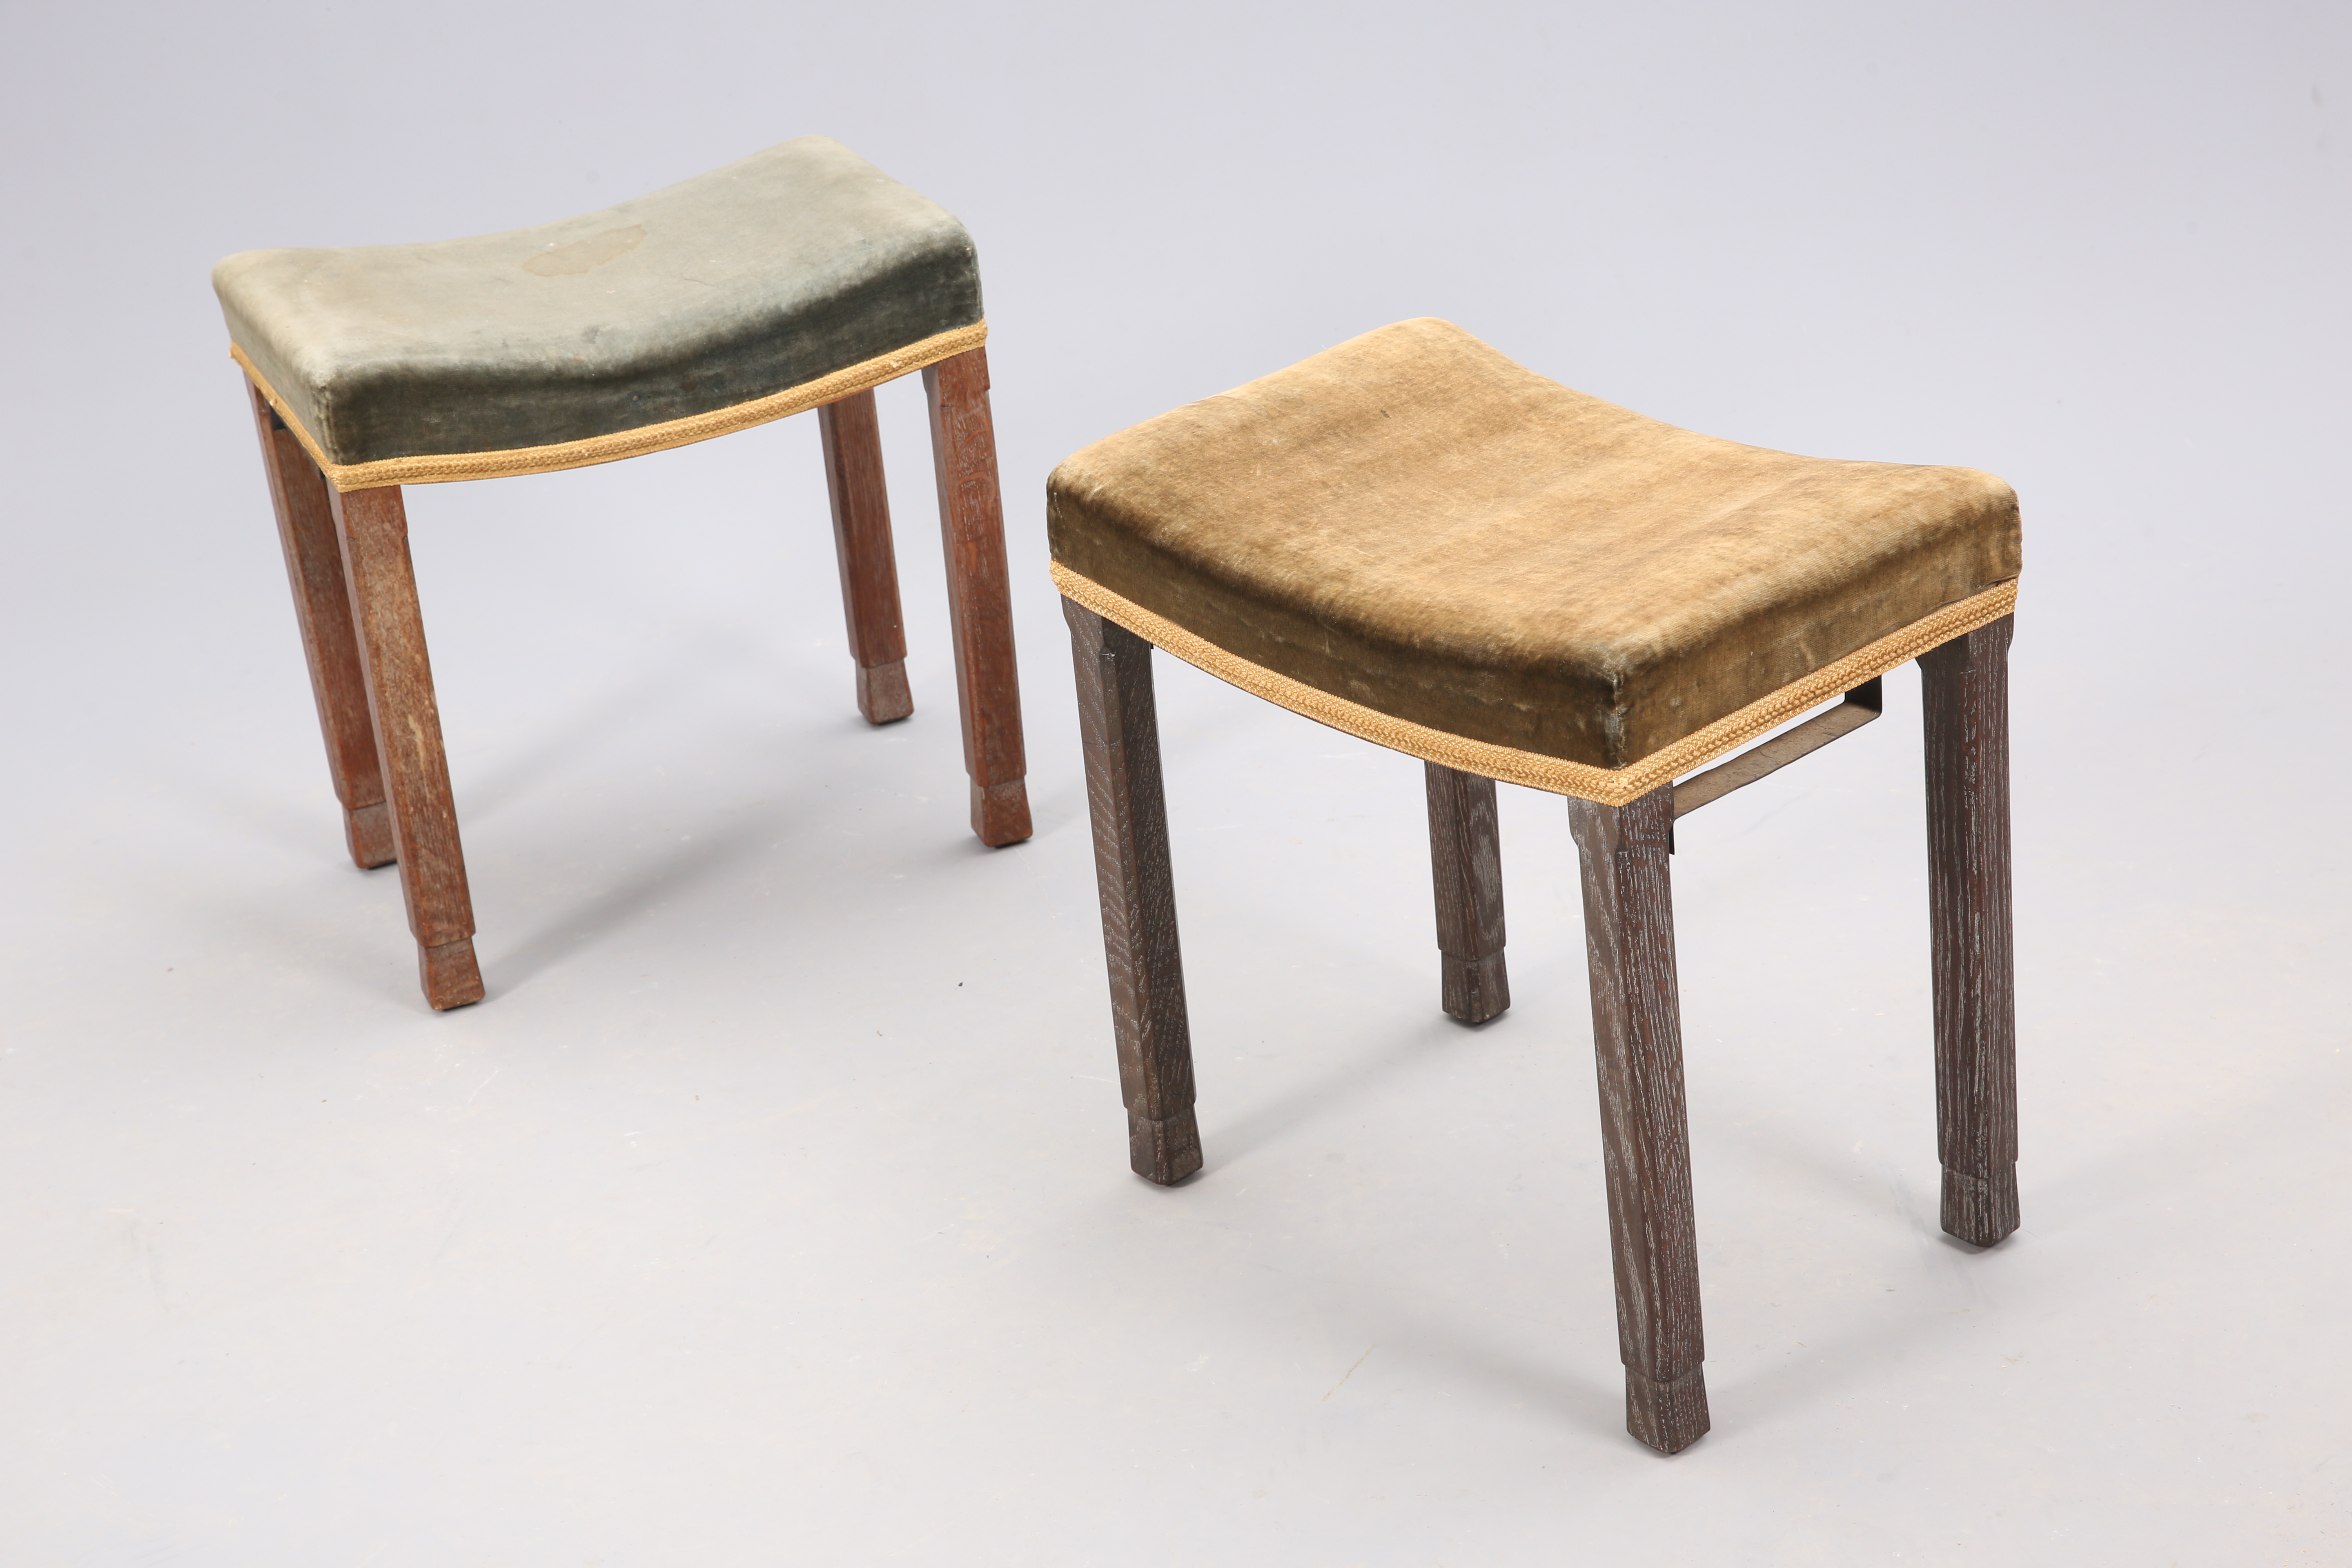 A NEAR PAIR OF GEORGE VI CORONATION STOOLS BY MAPLE & CO